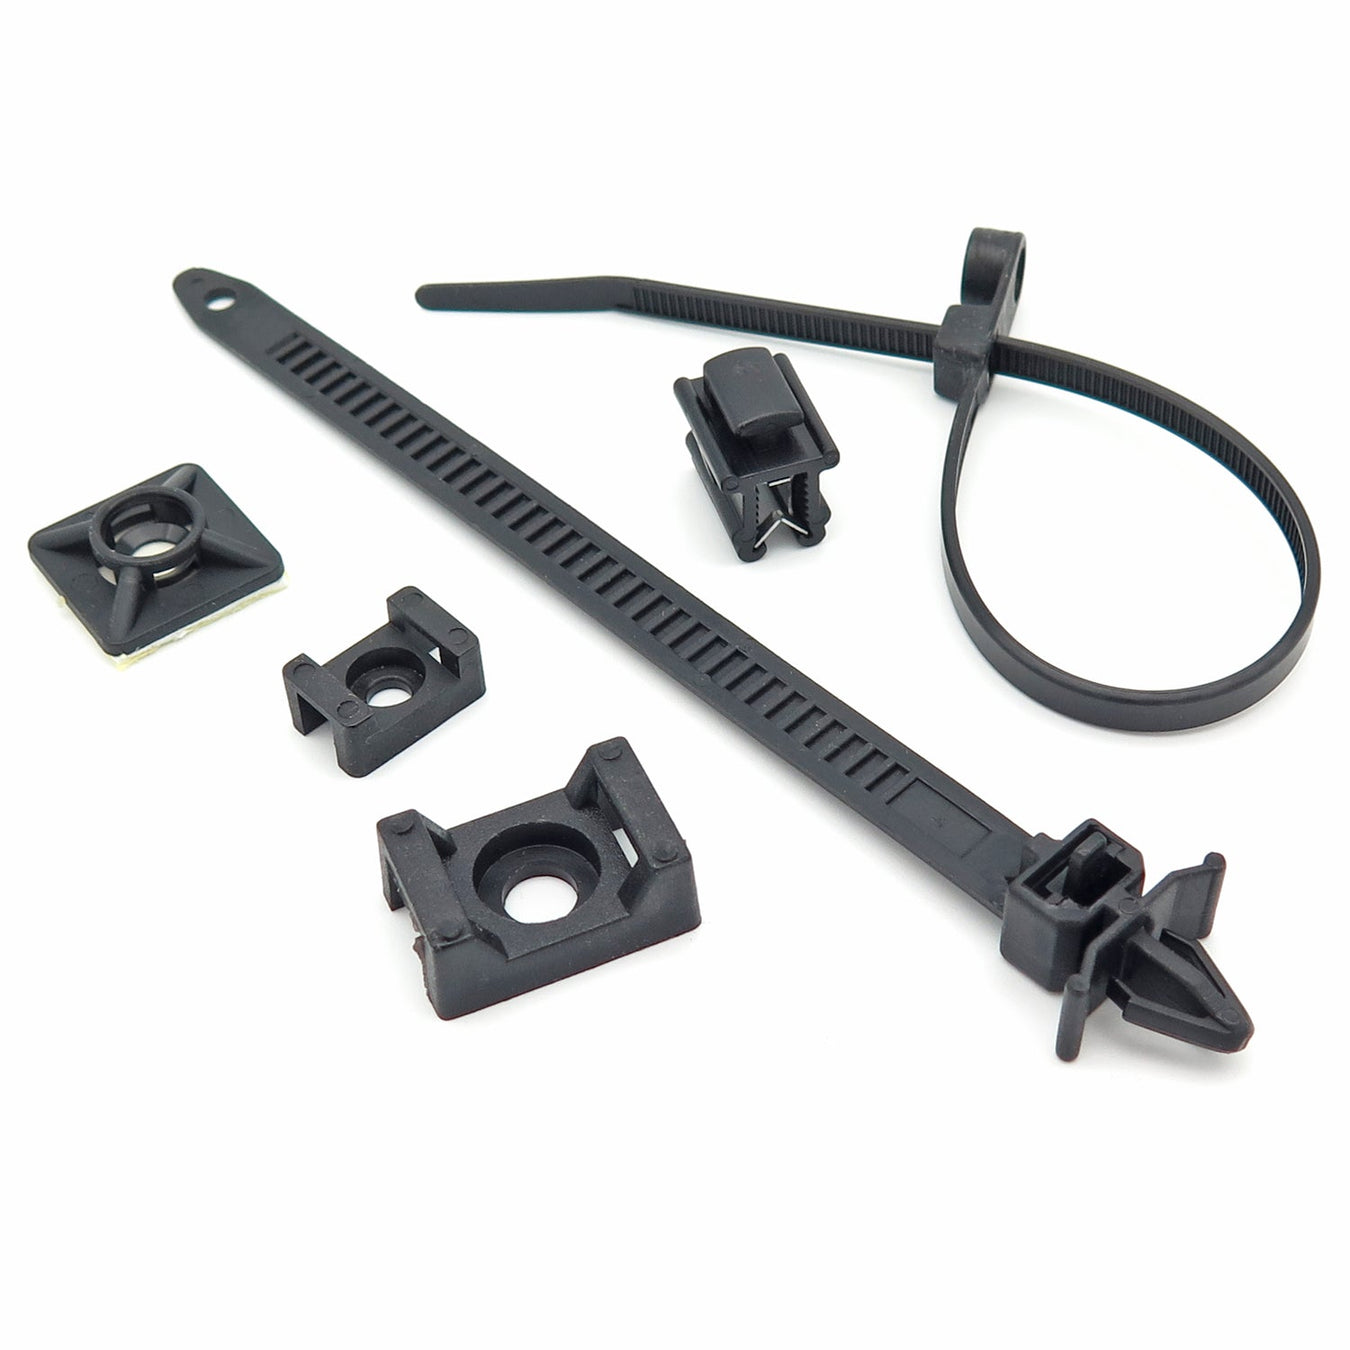 Cable Ties & Mounts - VehicleClips